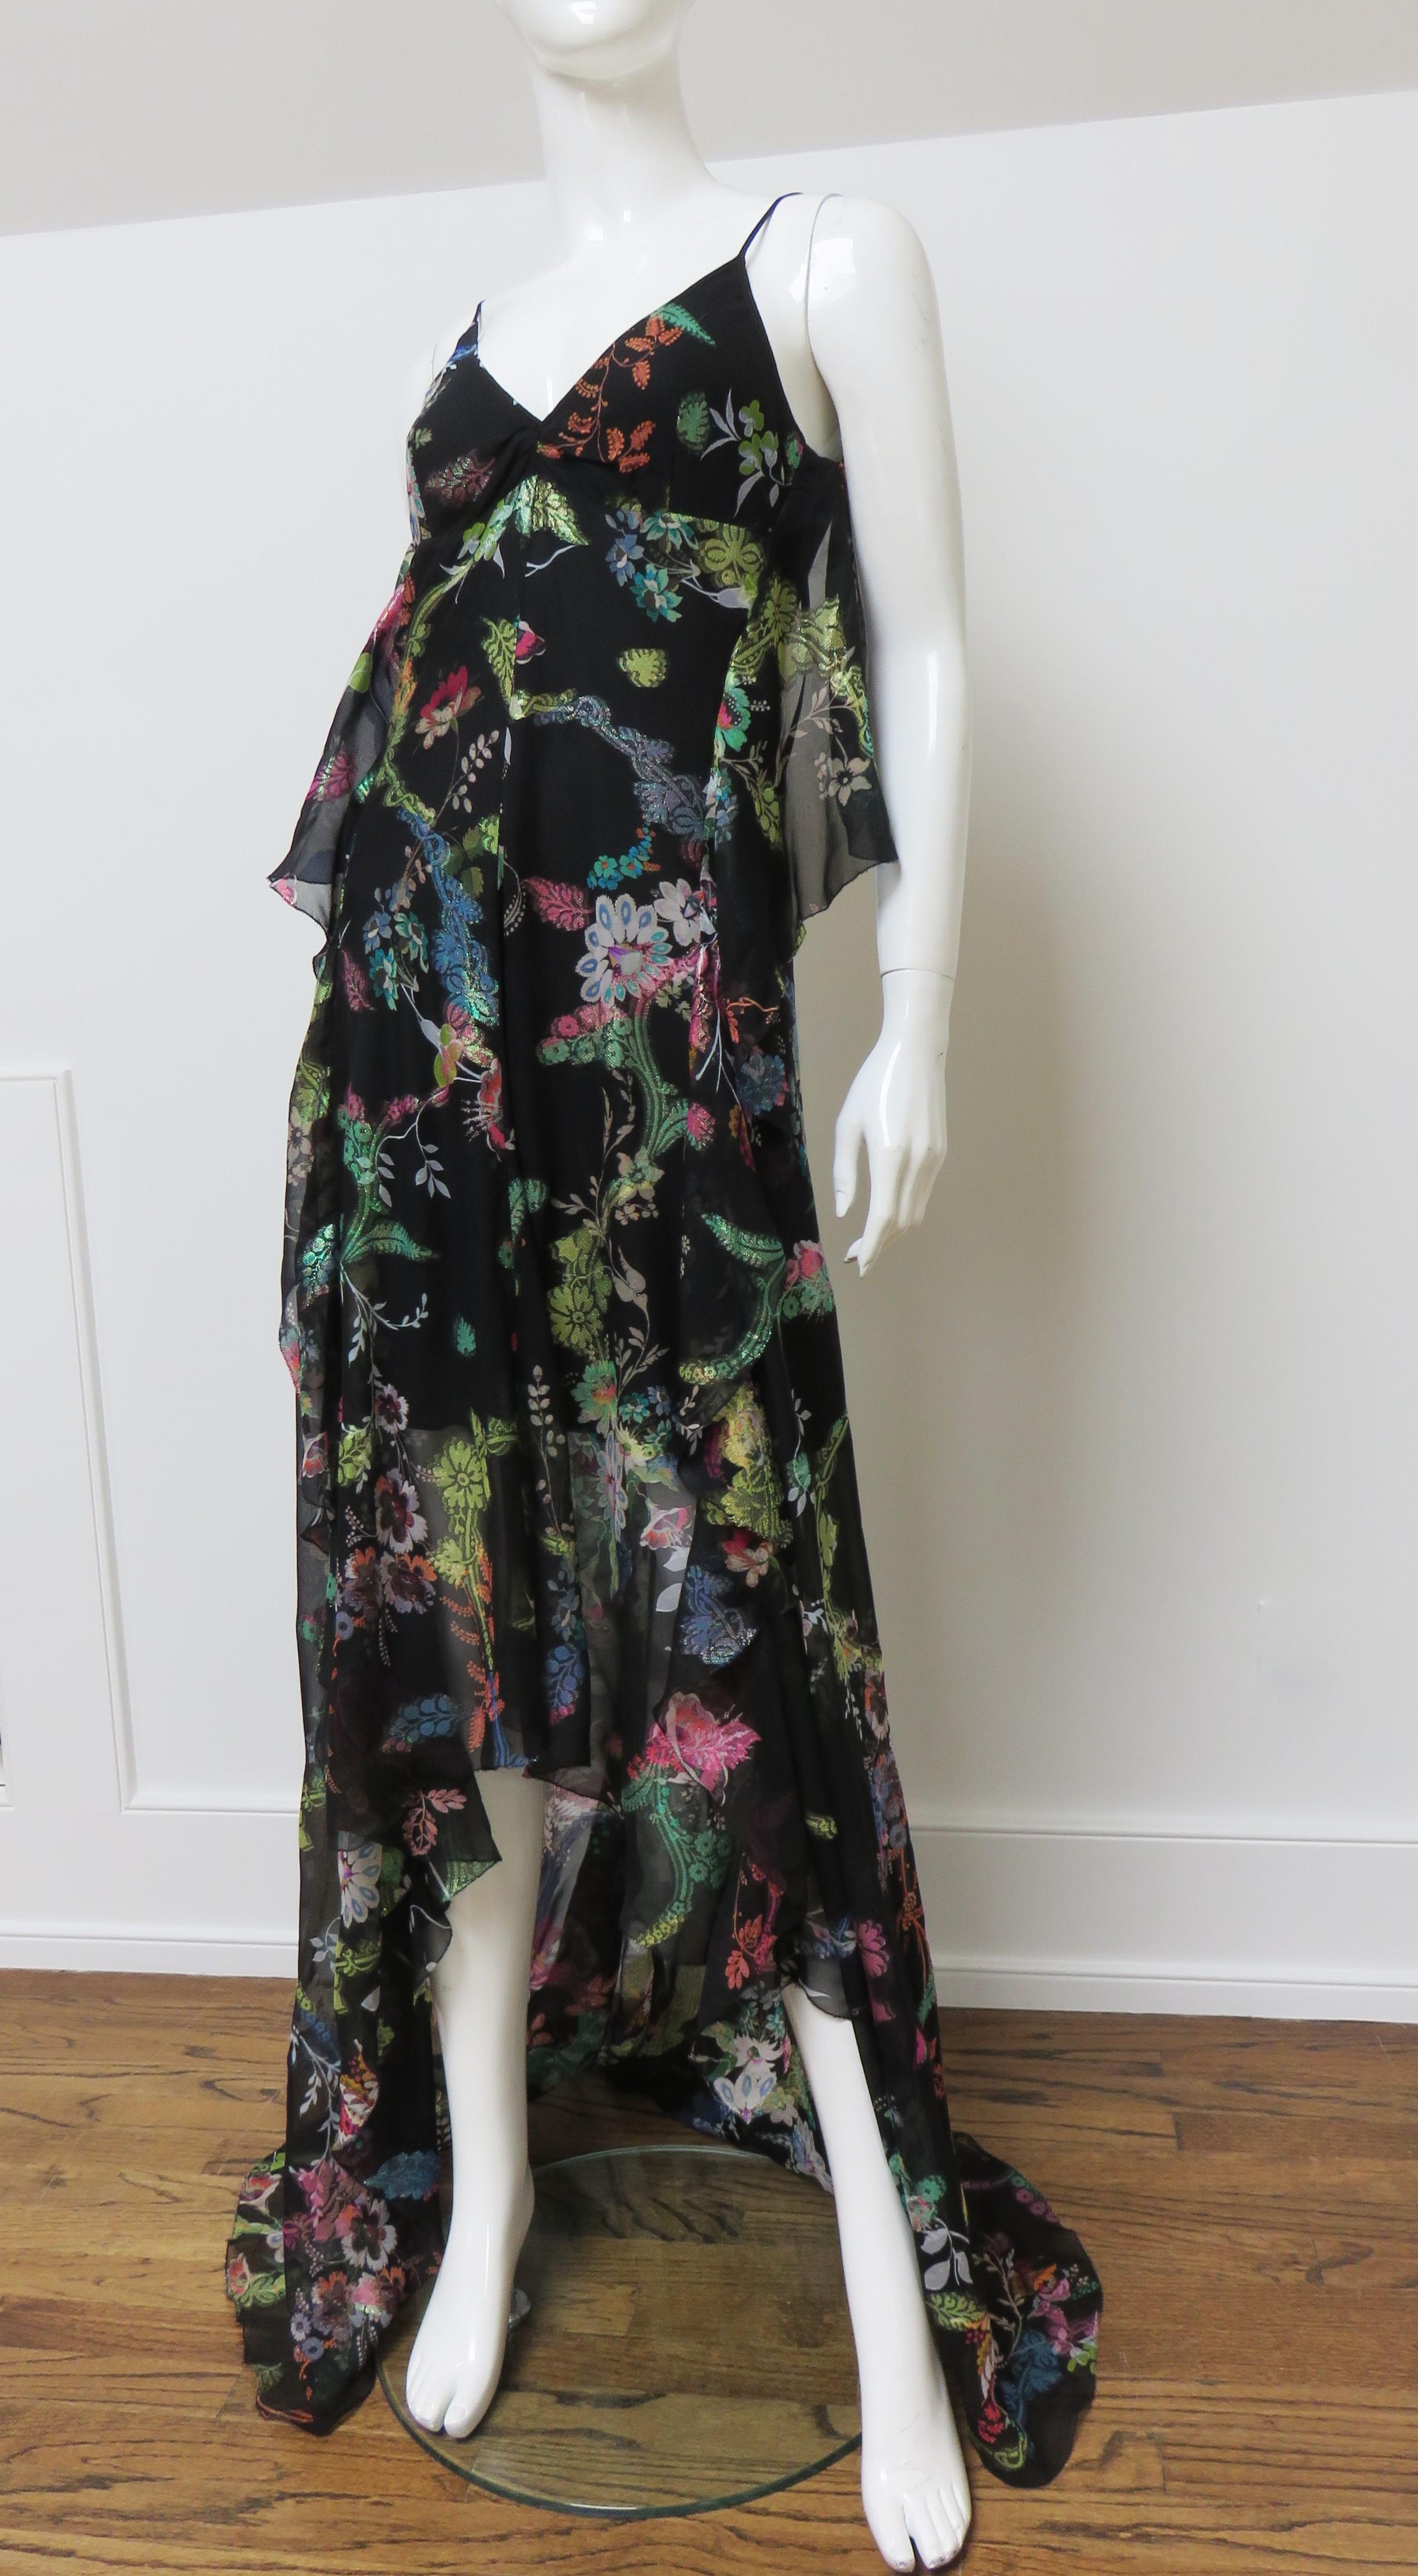 A stunning black silk maxi dress gown in a colorful elaborate flower print with iridescent accents.  It has spaghetti straps and a deep cut out back with adjustable panels of fabric draping on either side. The full skirt portion is shorter in the